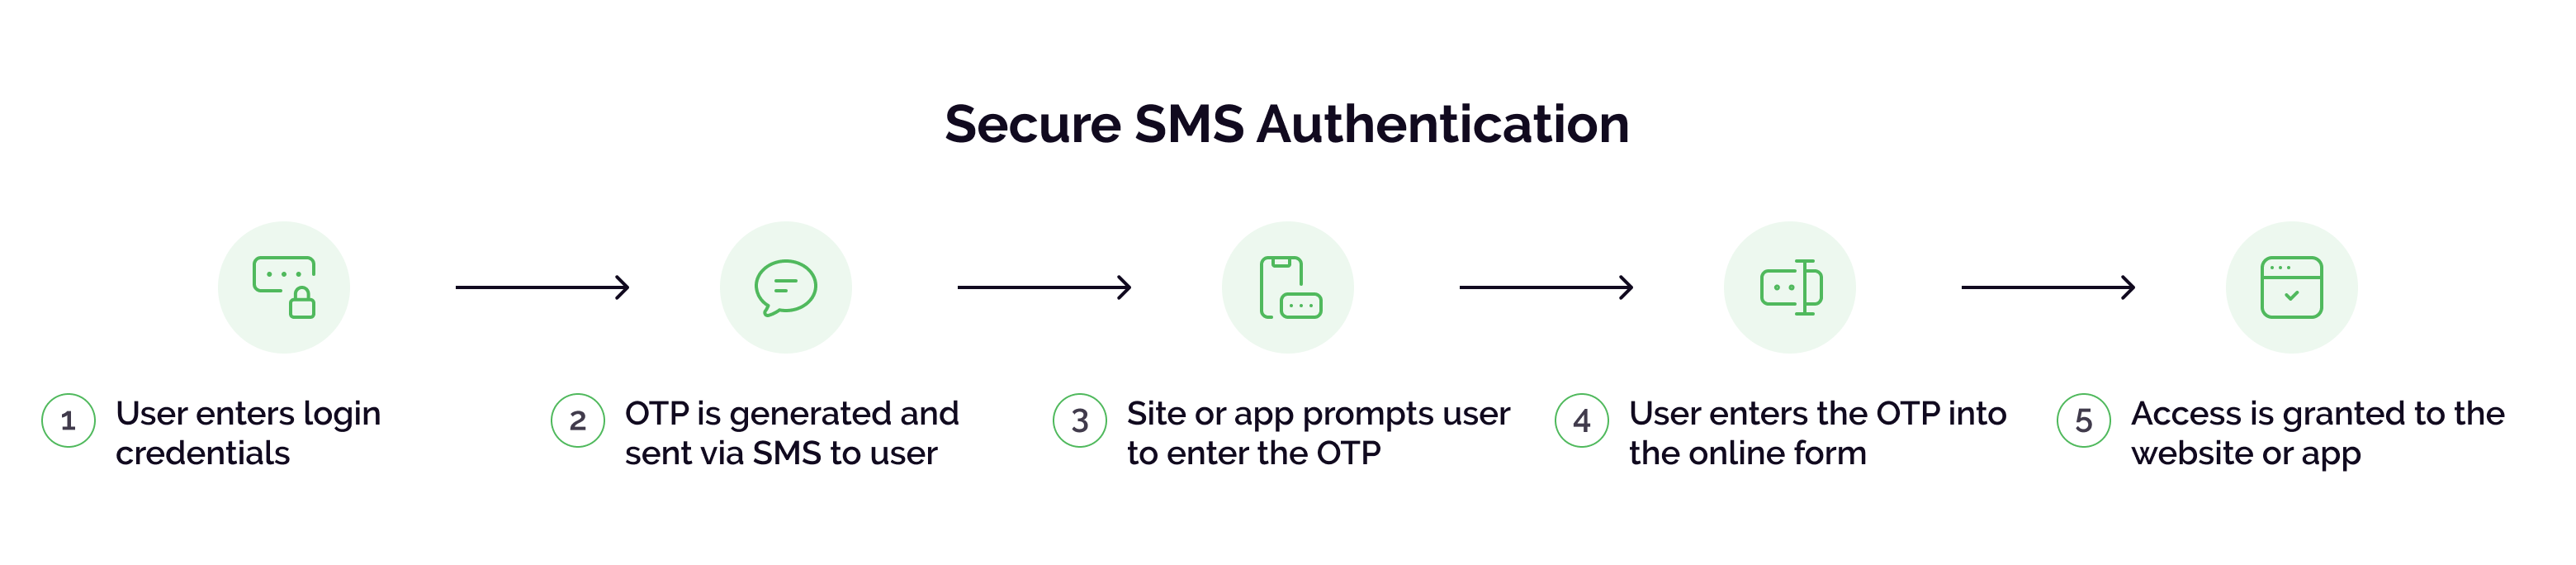 A diagram showing the steps of secure SMS authentication